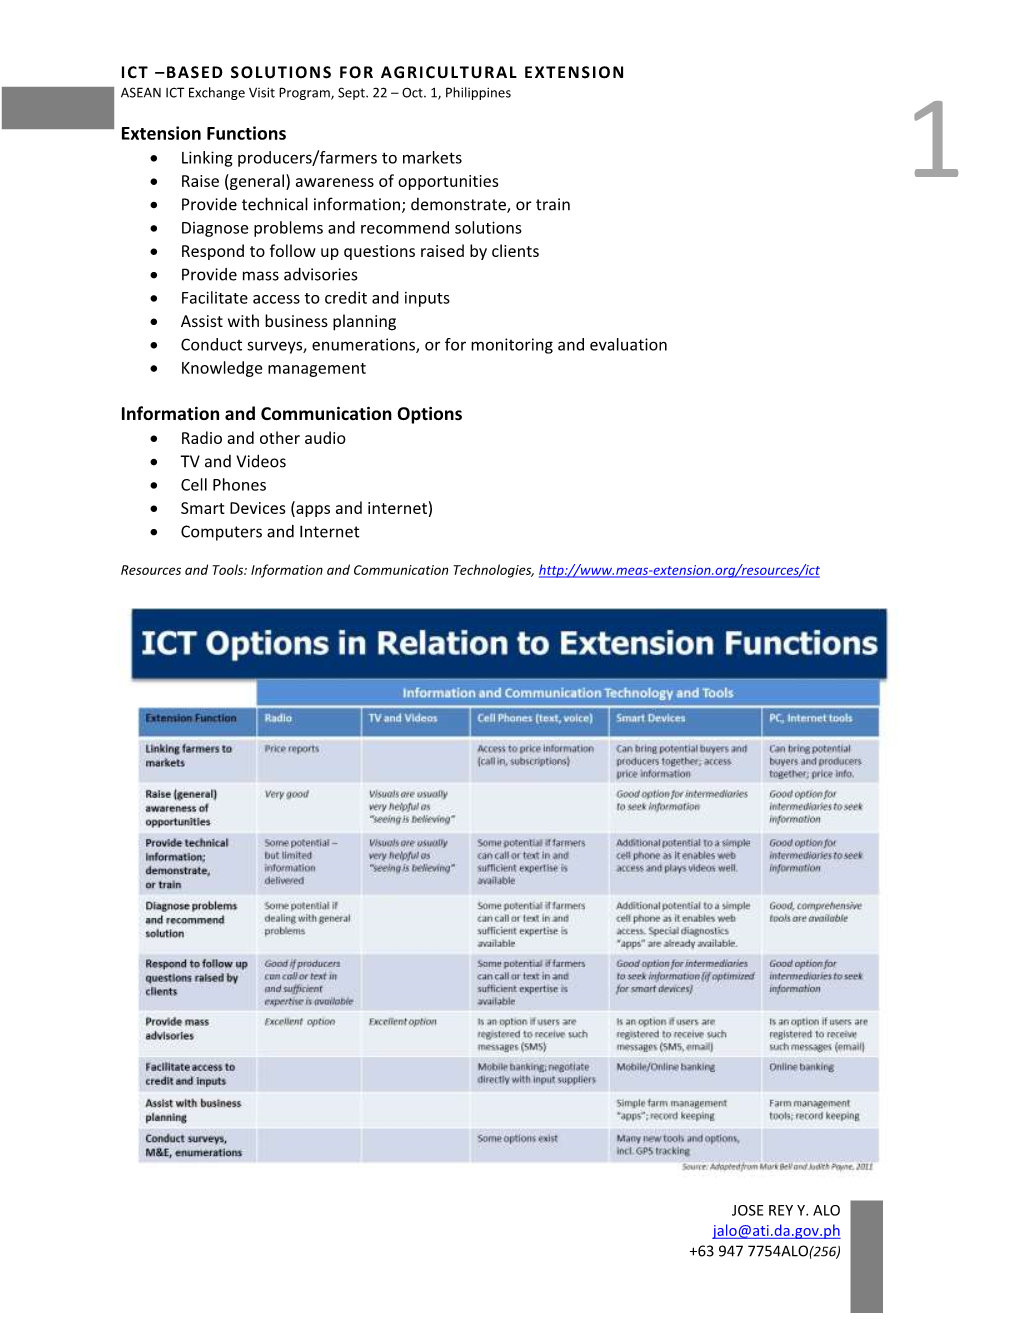 Extension Functions Information and Communication Options